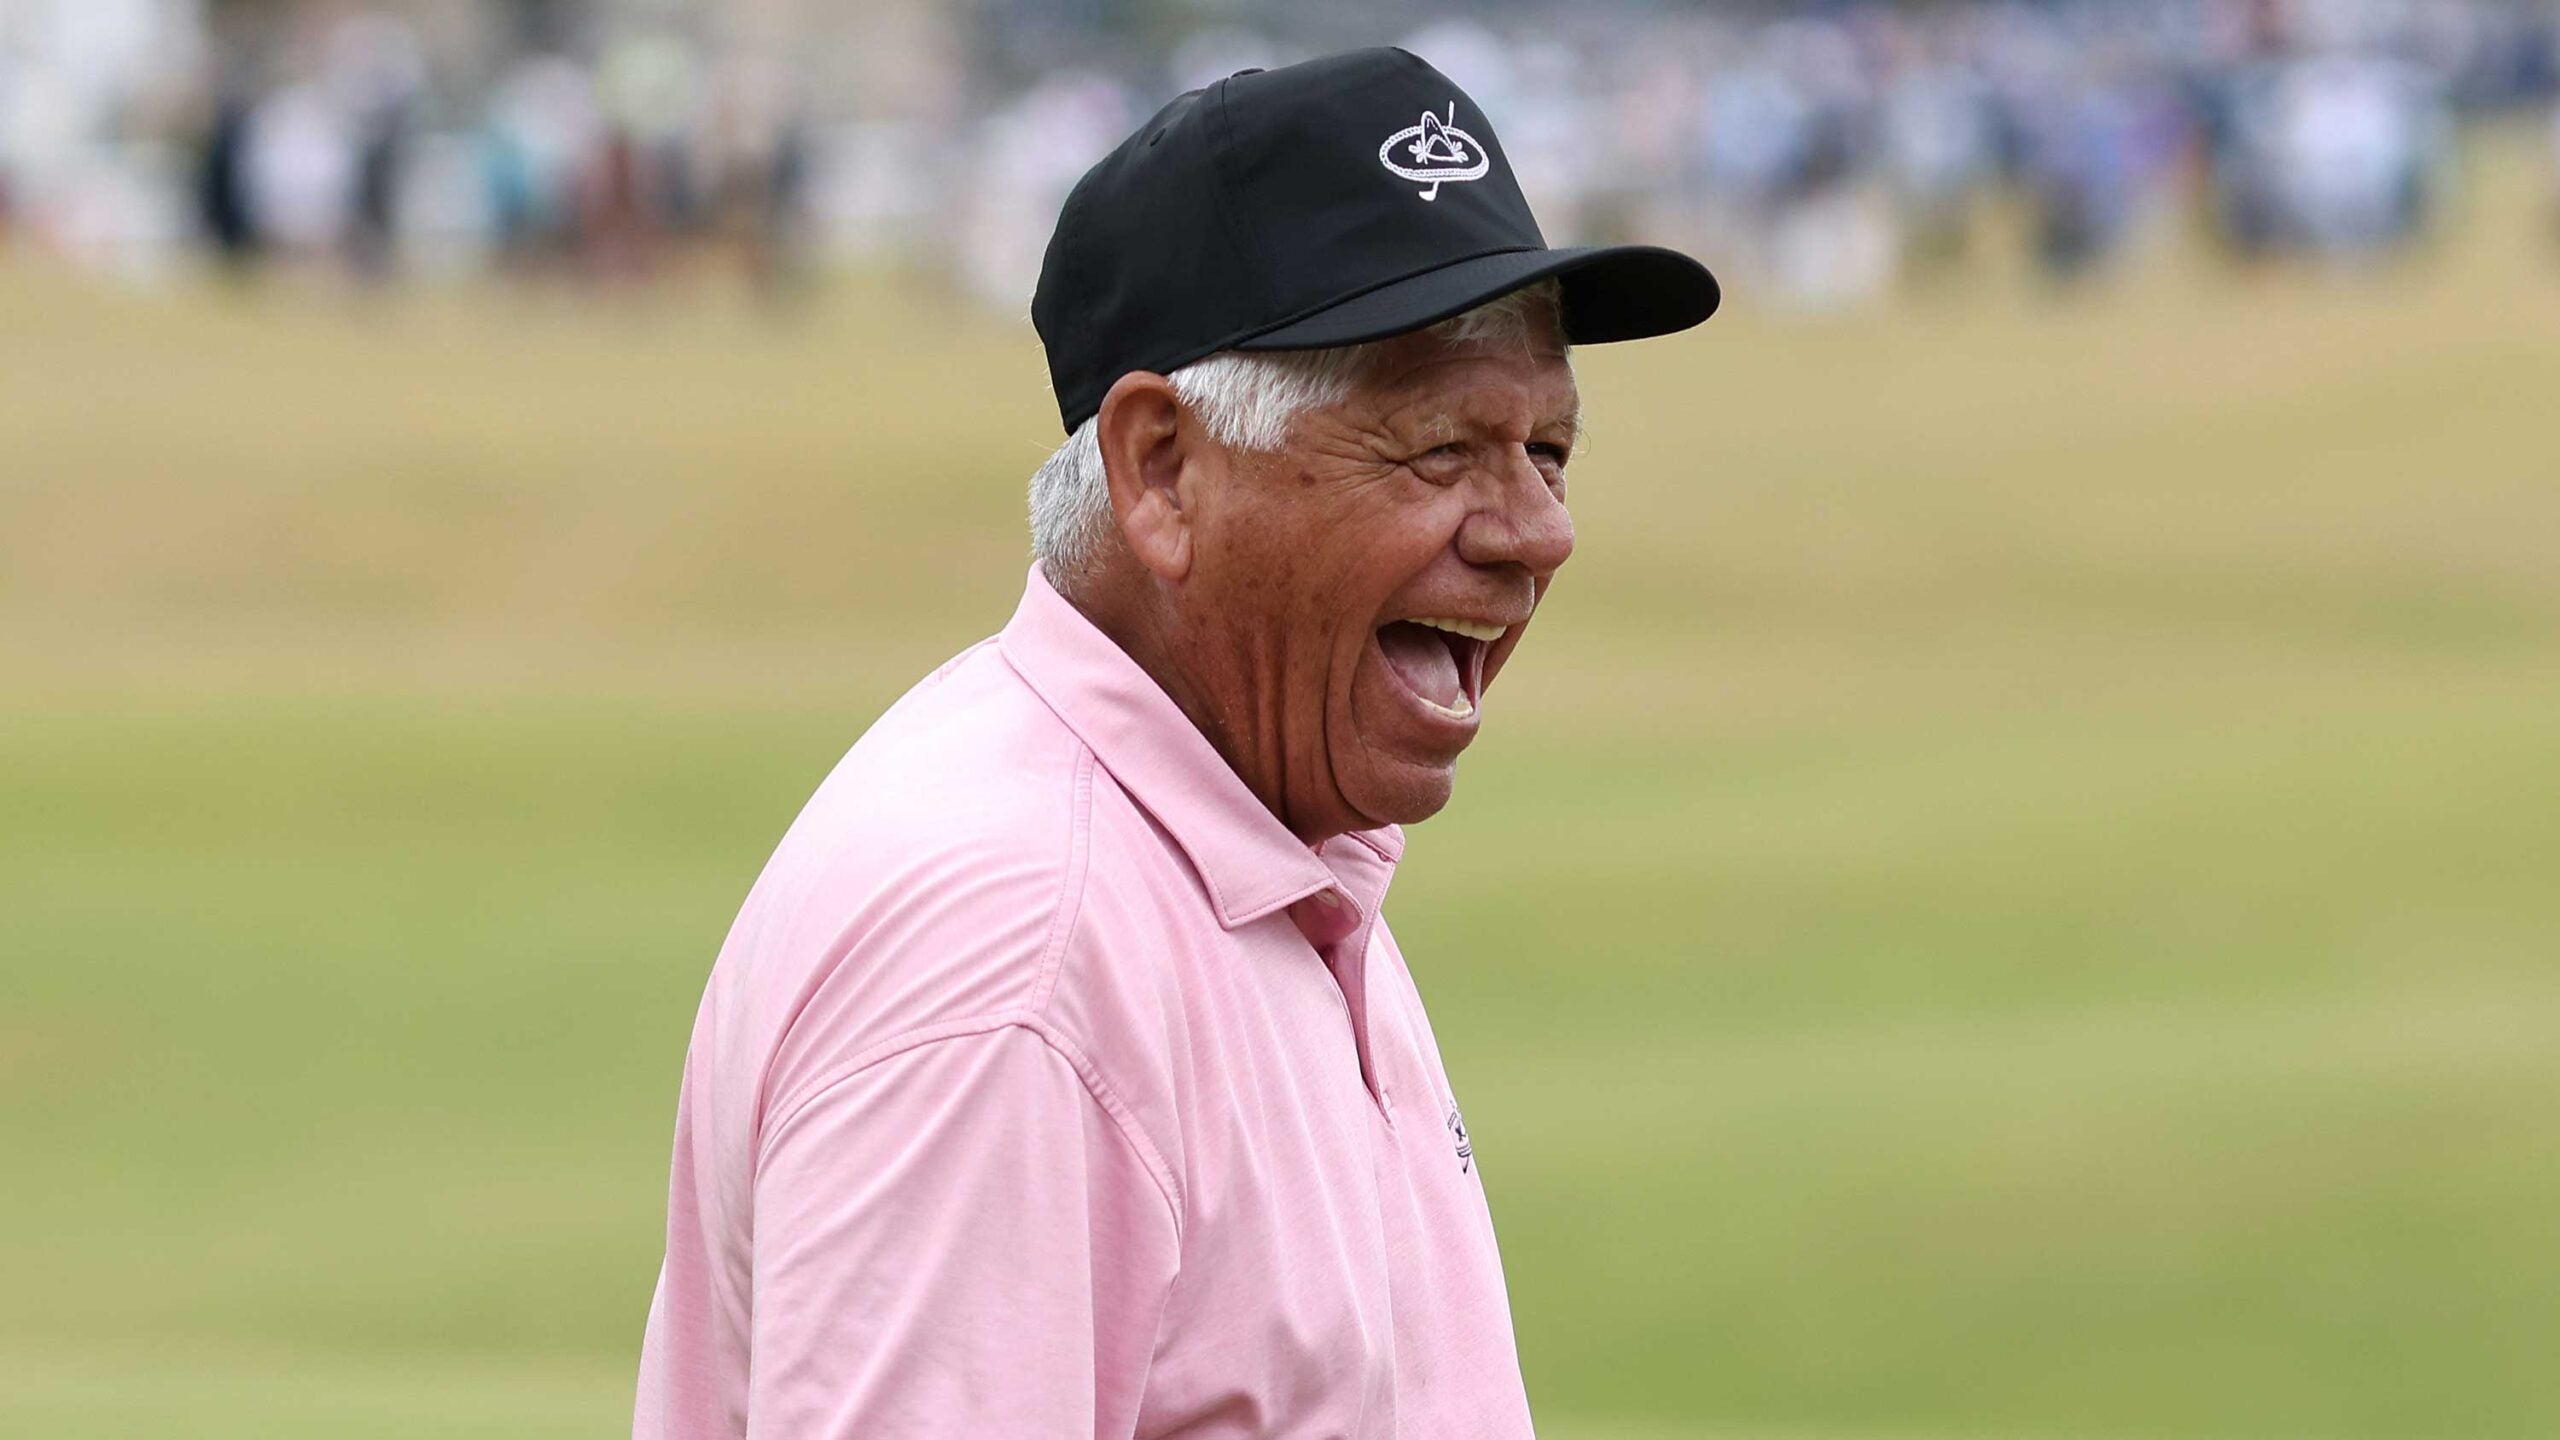 Lee Trevino on LIV Golf money, pro golf's future: 'I came along too early'